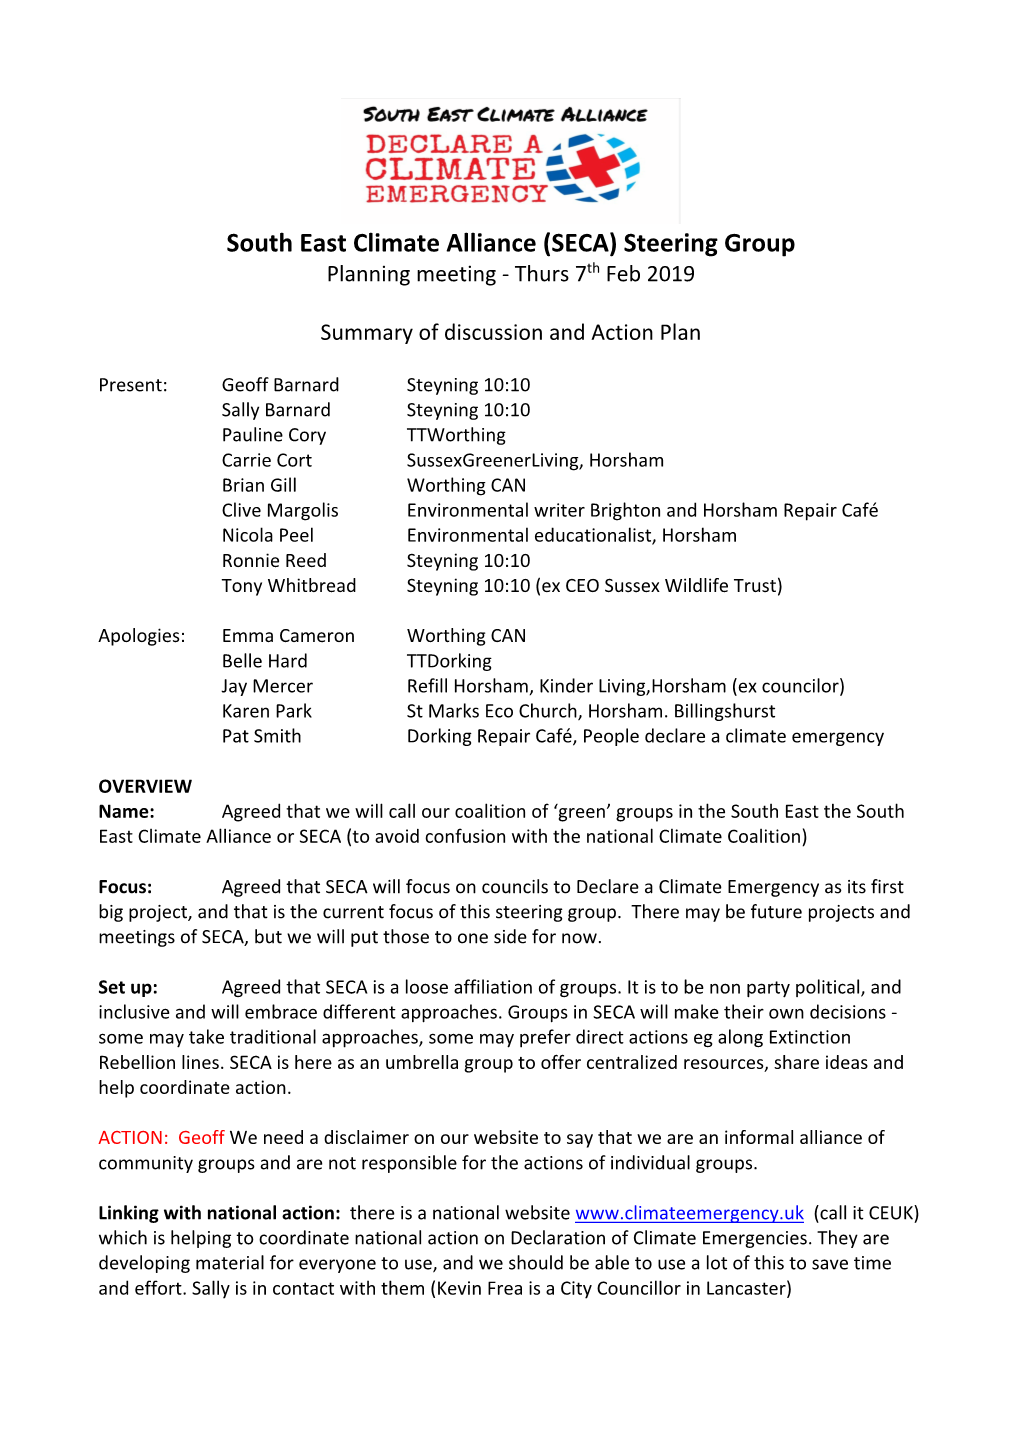 South East Climate Alliance (SECA) Steering Group Planning Meeting - Thurs 7Th Feb 2019